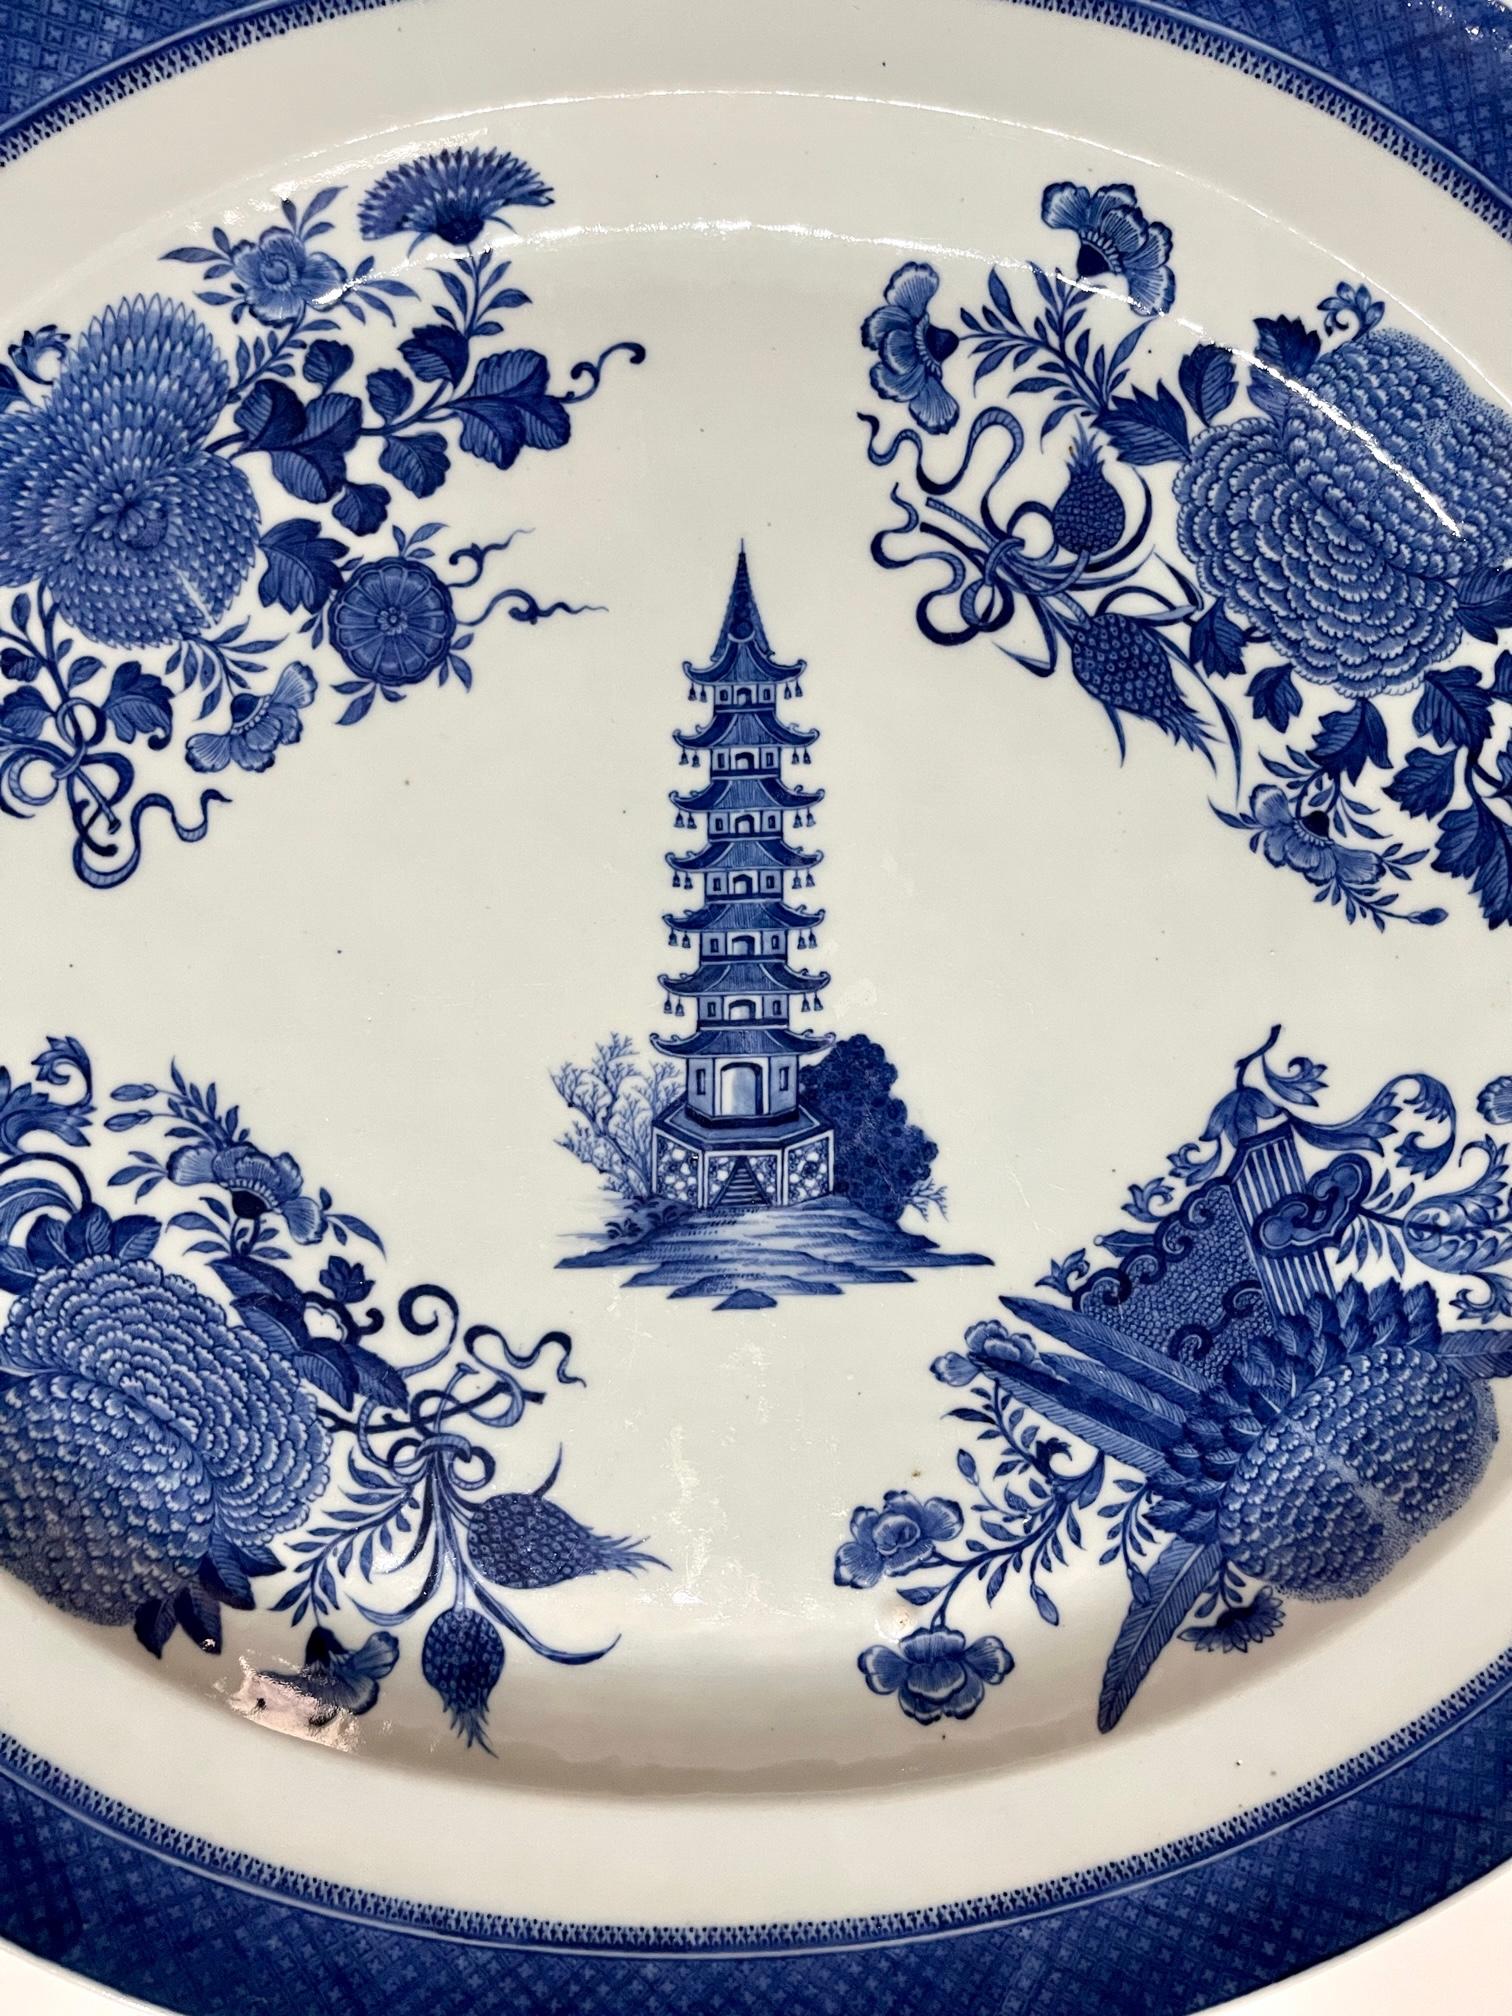 Porcelain Chinese Export 'Blue Fitzhugh' Platters from the Cabot-Perkins Service, c. 1812 For Sale